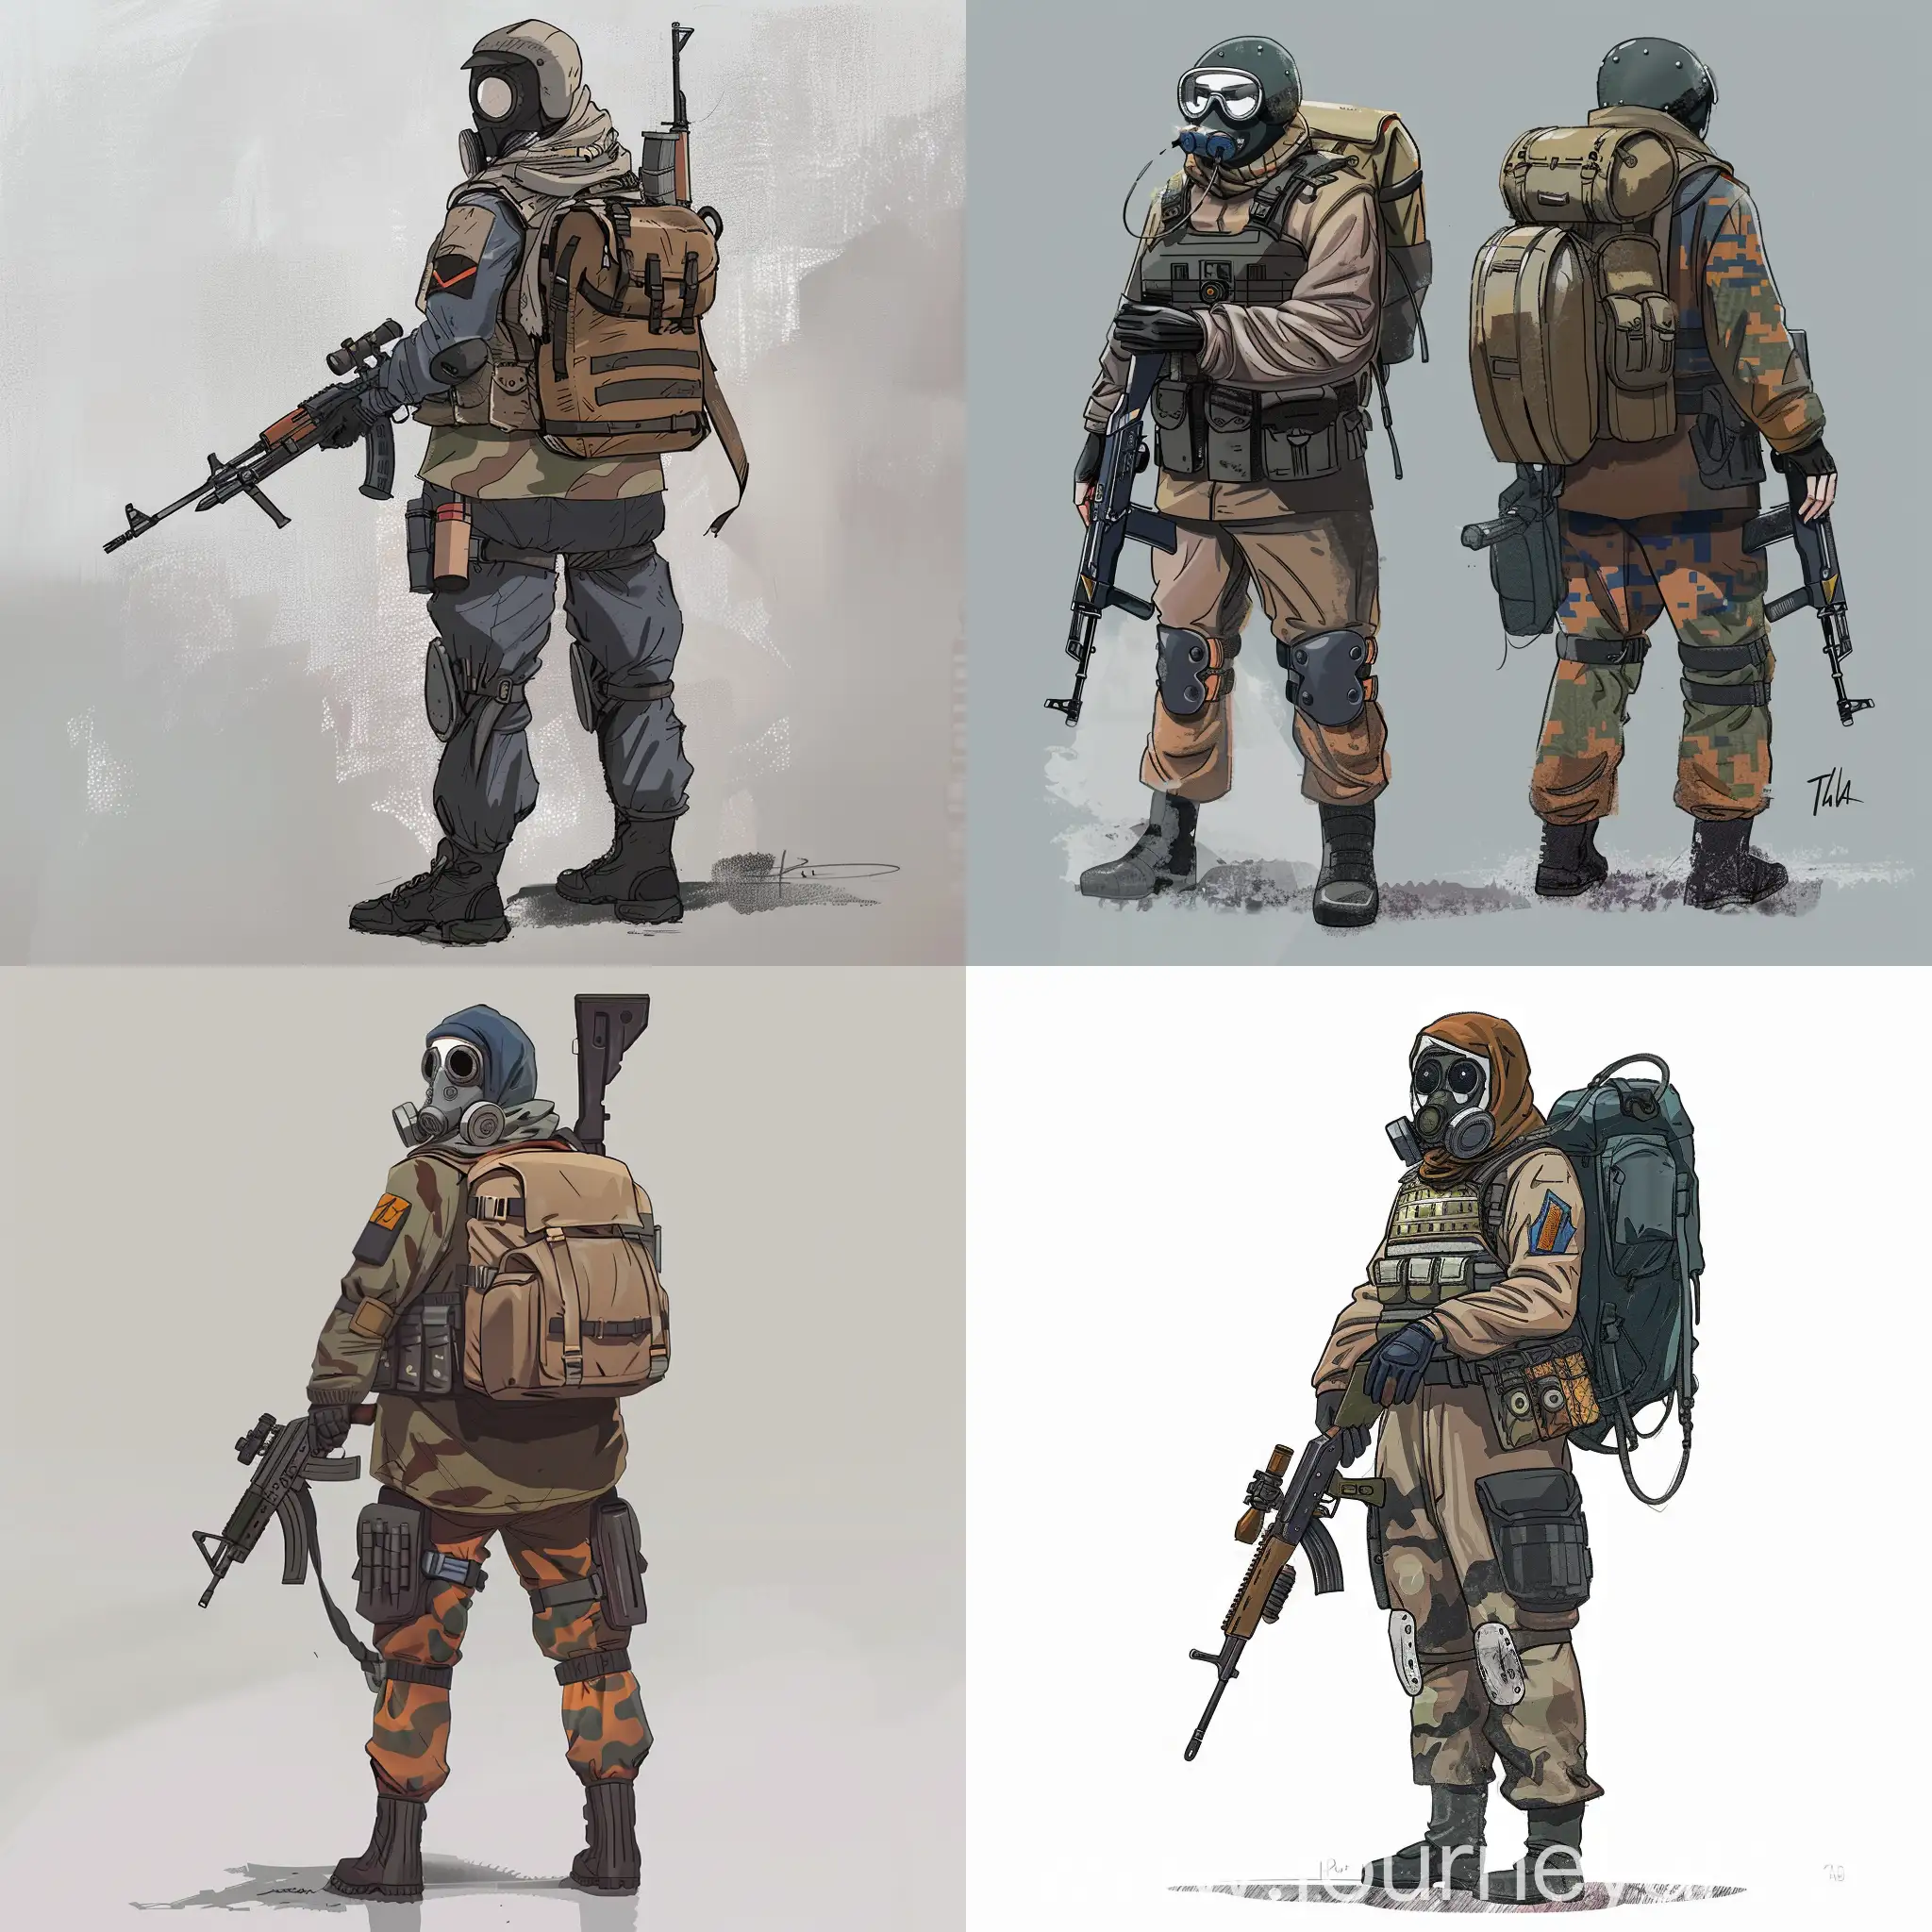 Character concept art, Dragunov SVD rifle, camouflage military uniform, gas mask, armor, military backpack on the back.